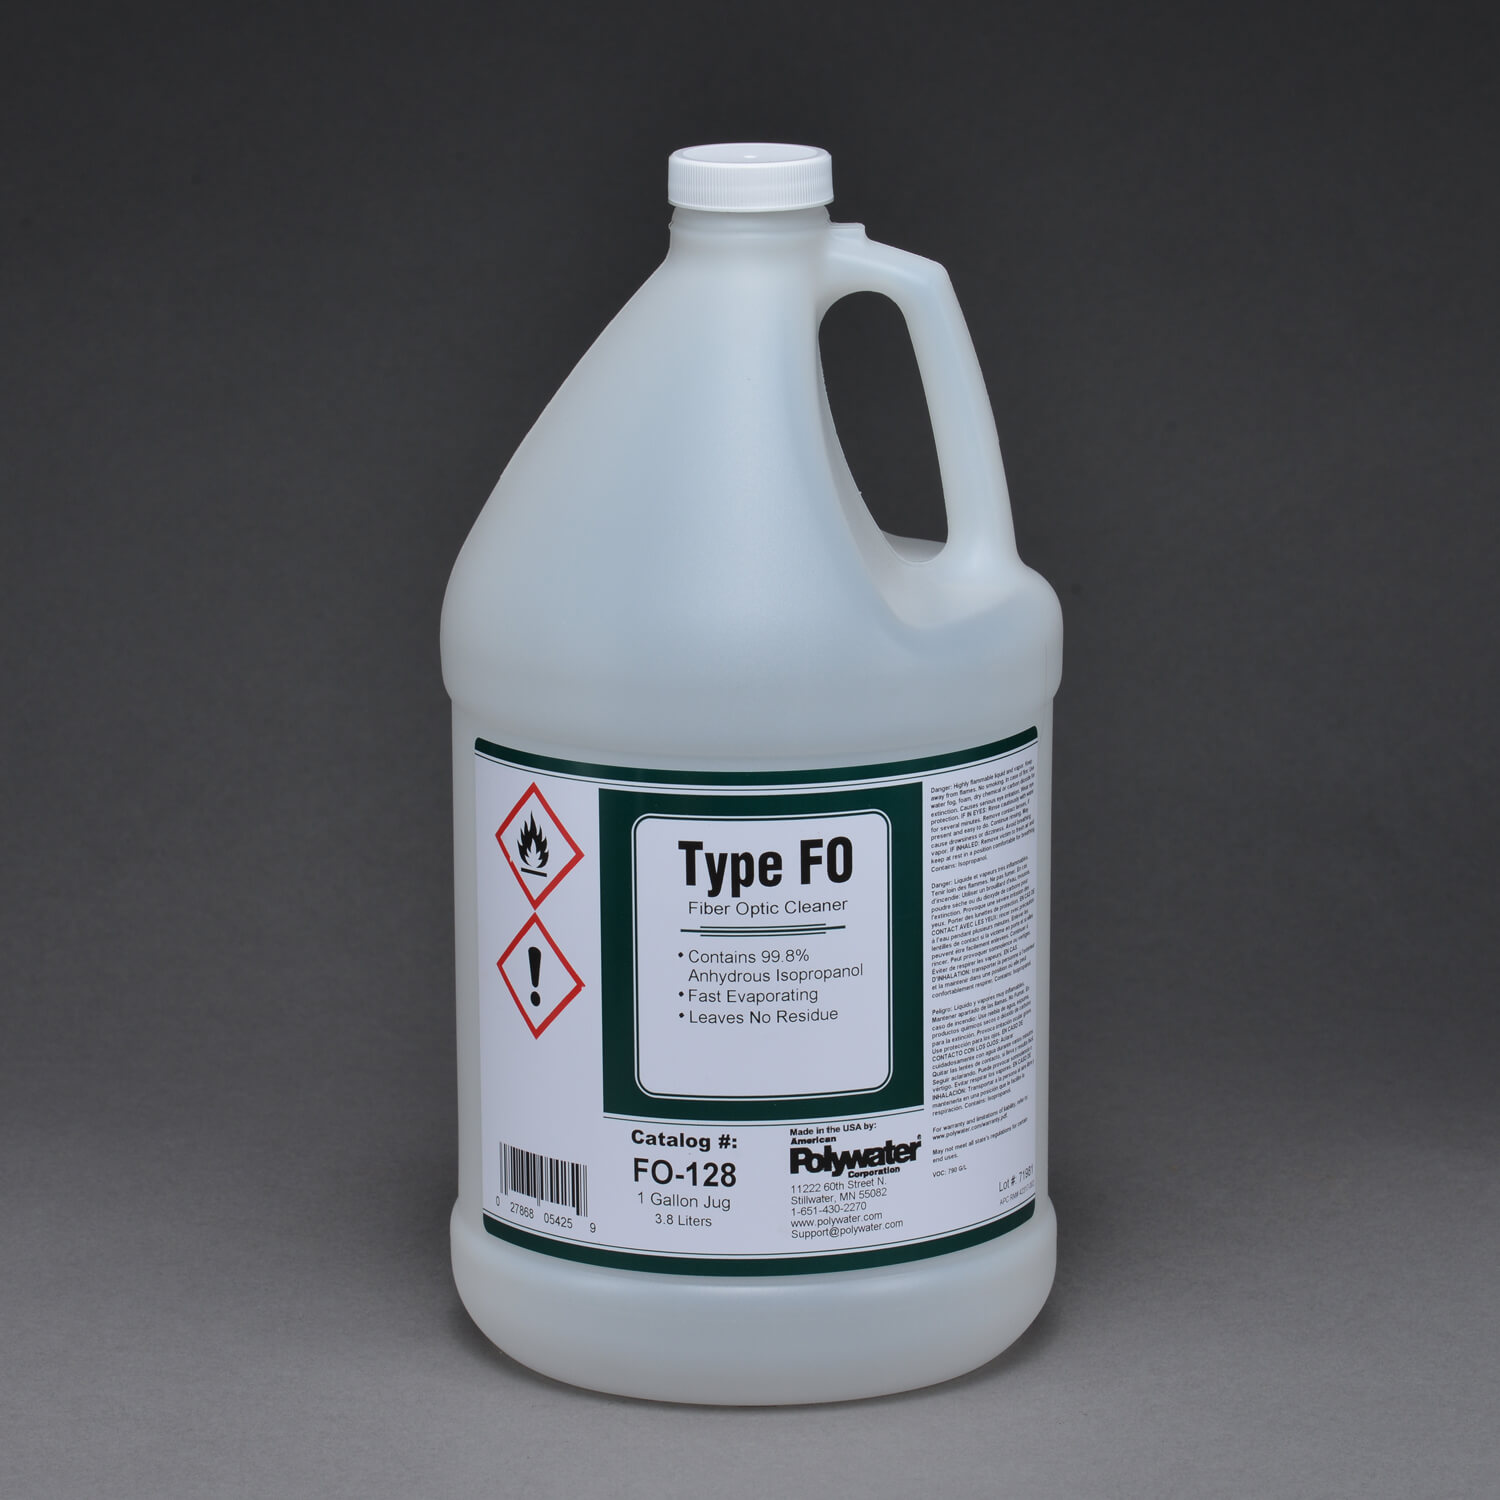 Polywater® Type FD™ Electrical Contact Cleaner - Polywater